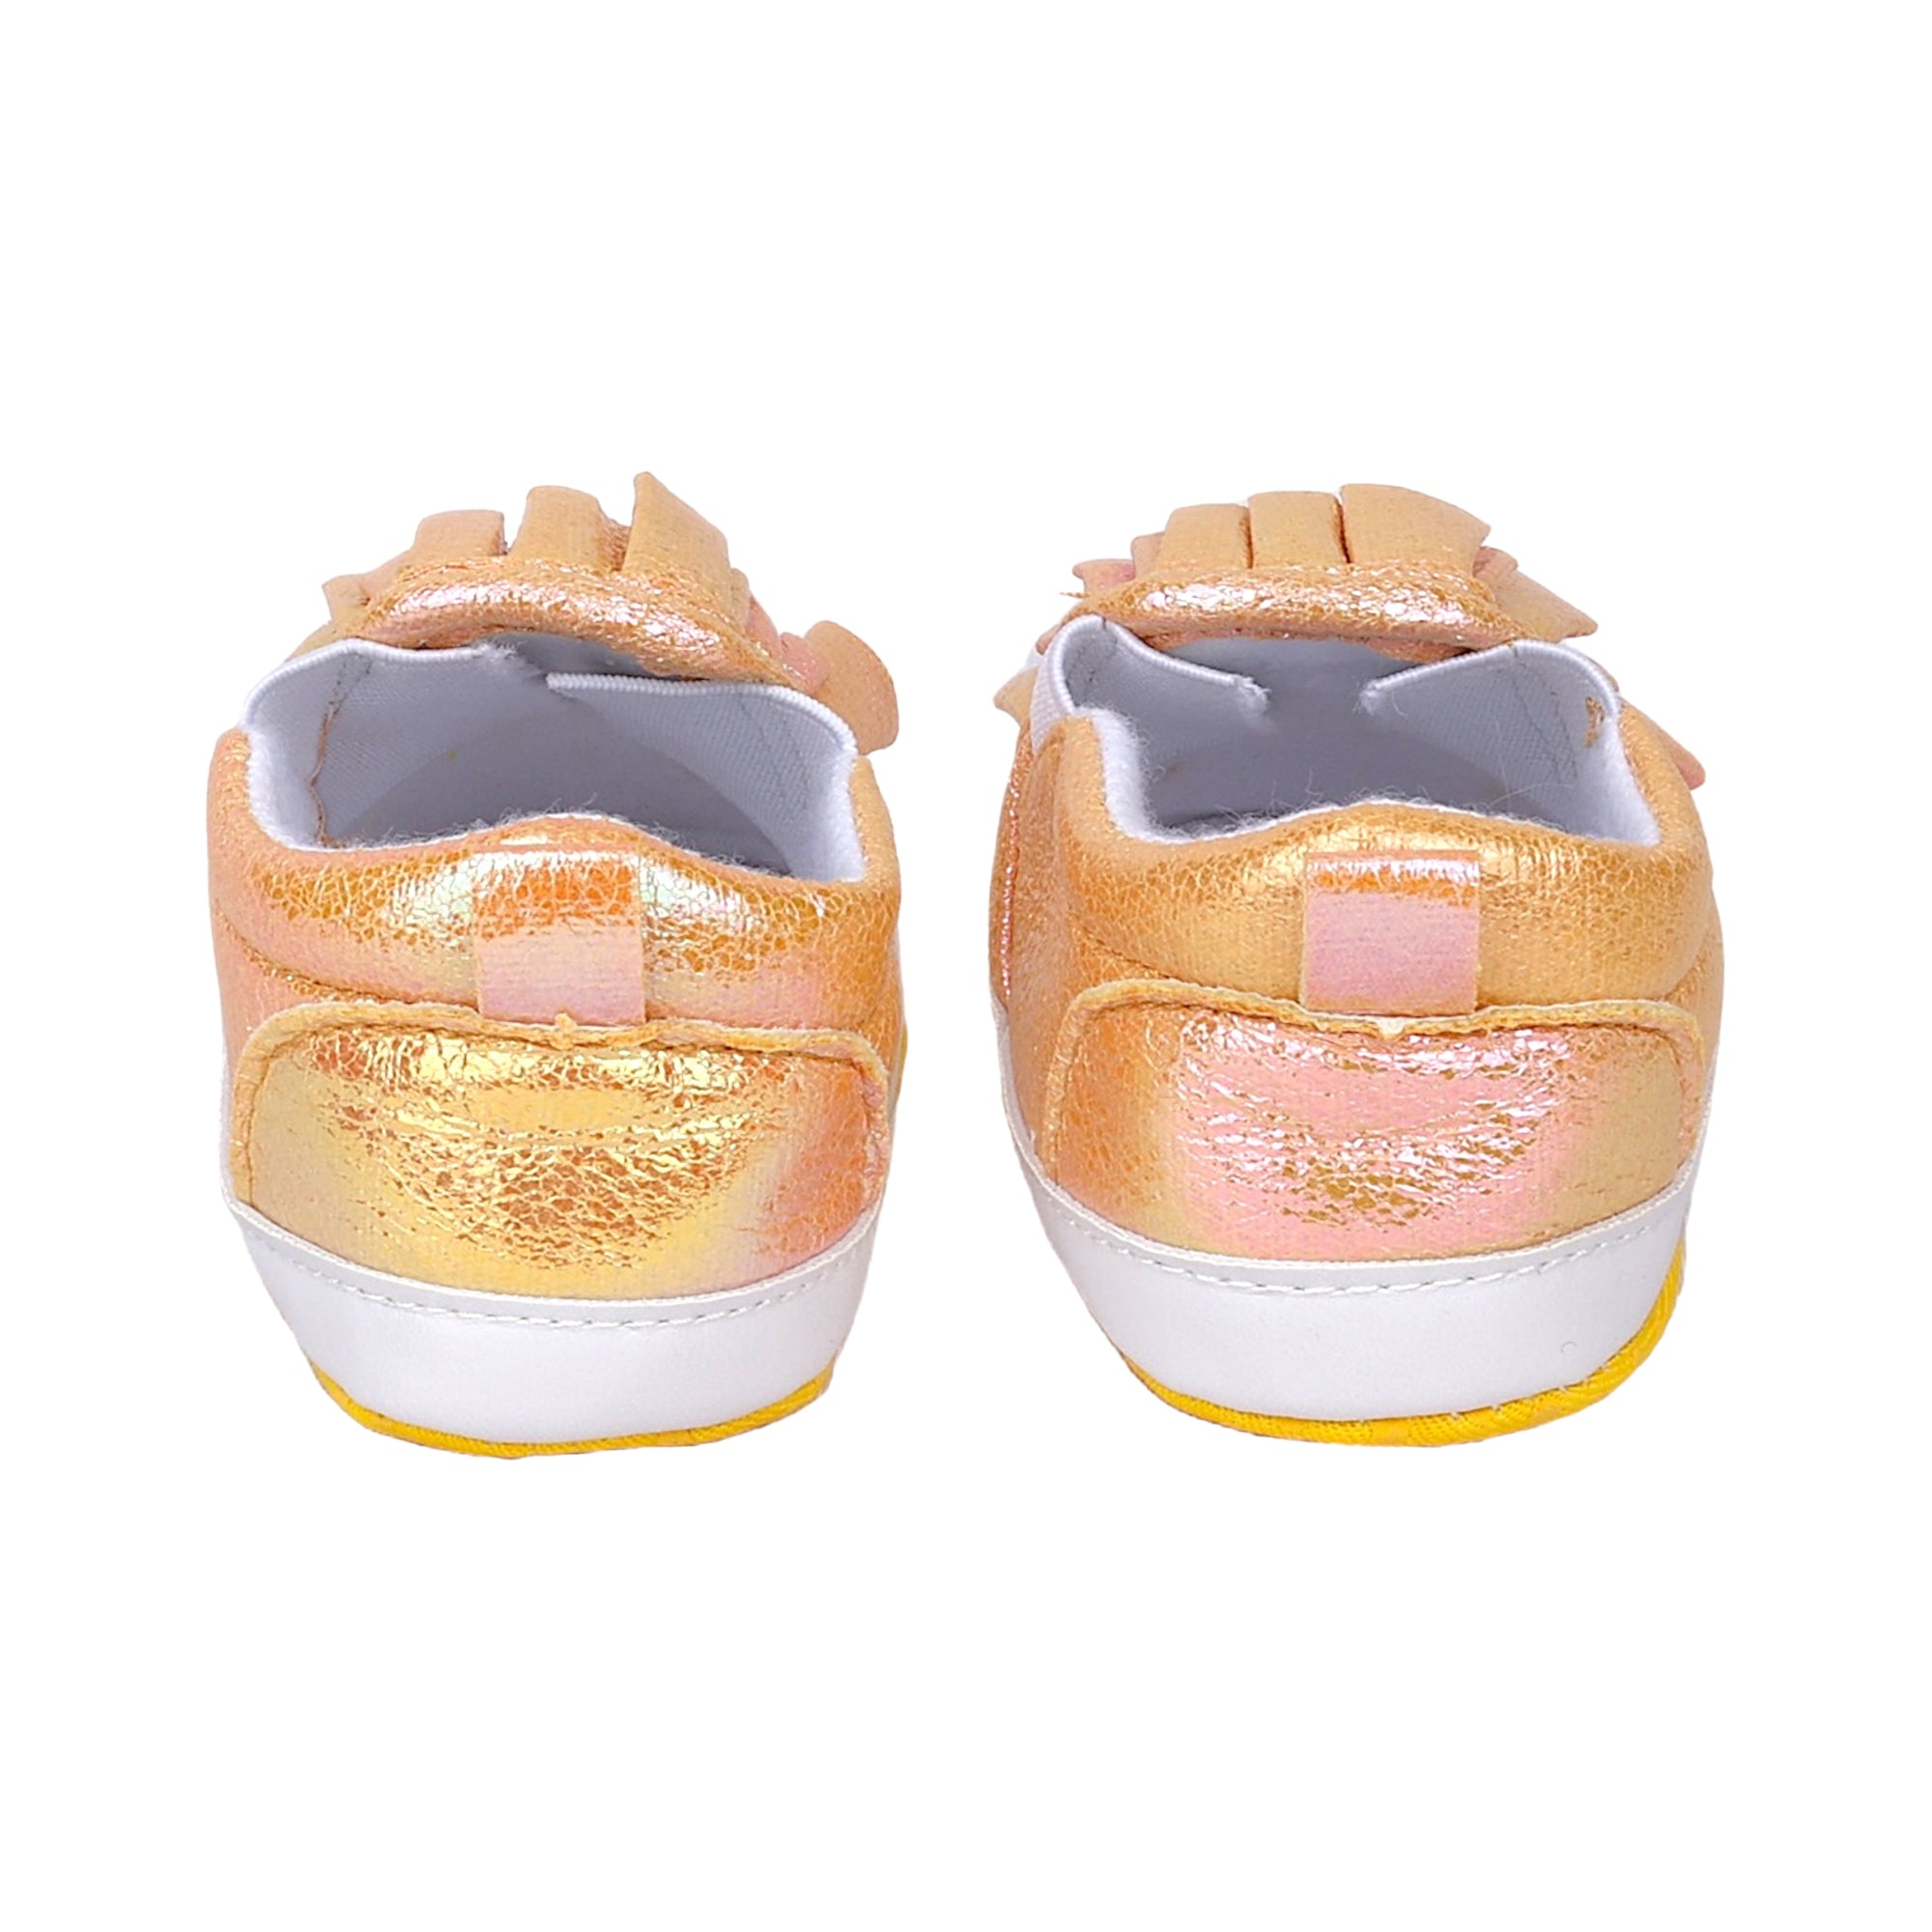 Baby Moo Frill Partywear Anti-Skid Slip-On Booties - Gold